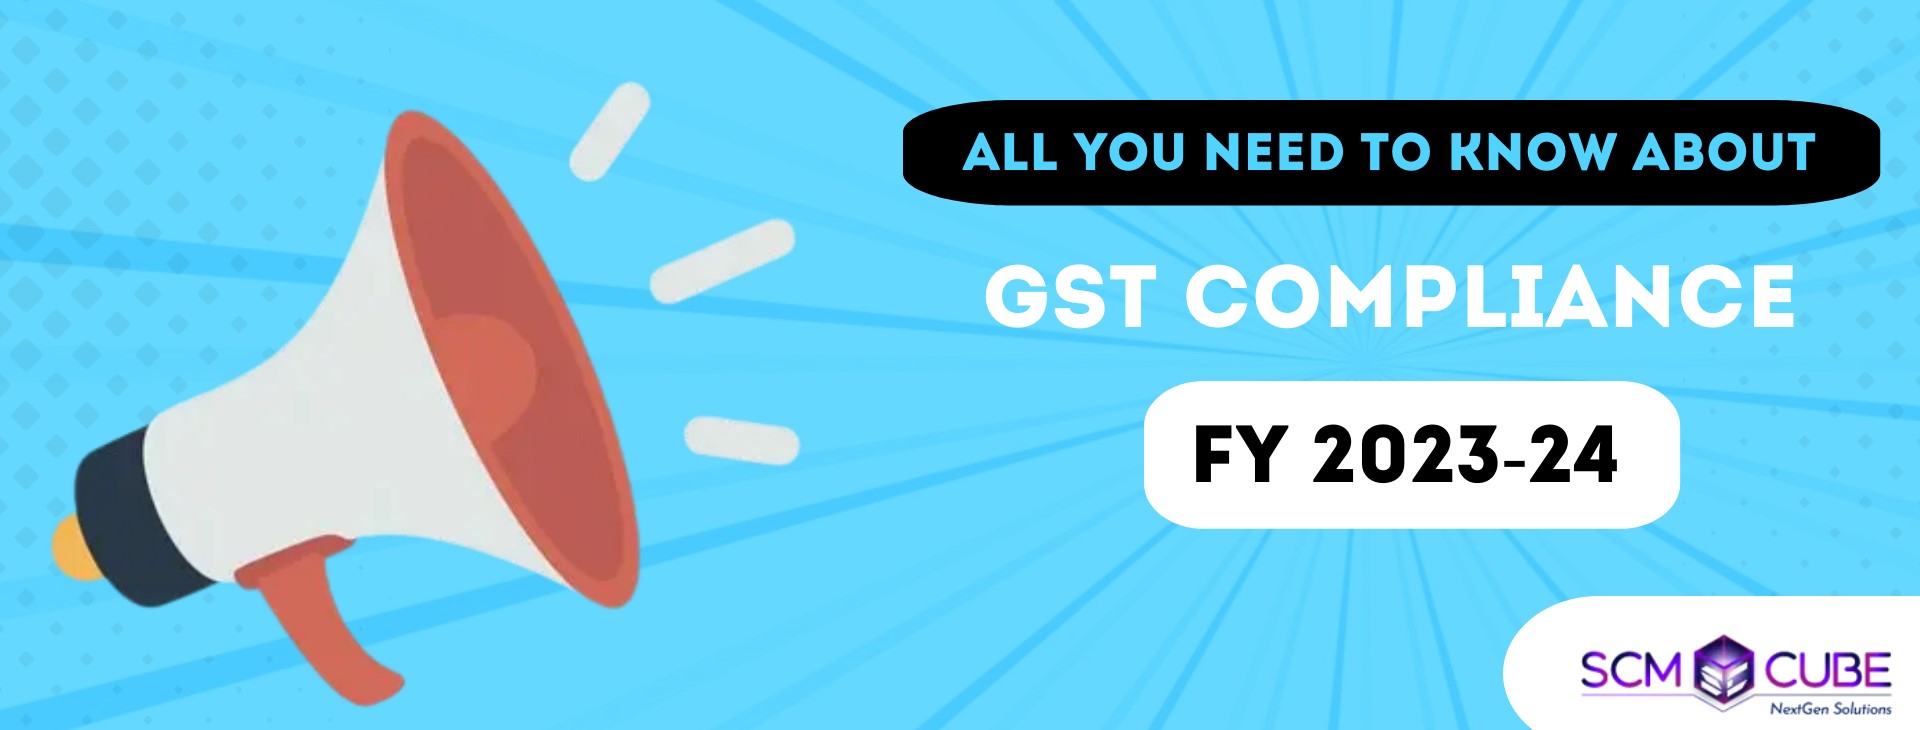 Key-Points-for-FY-2023-24-under-GST